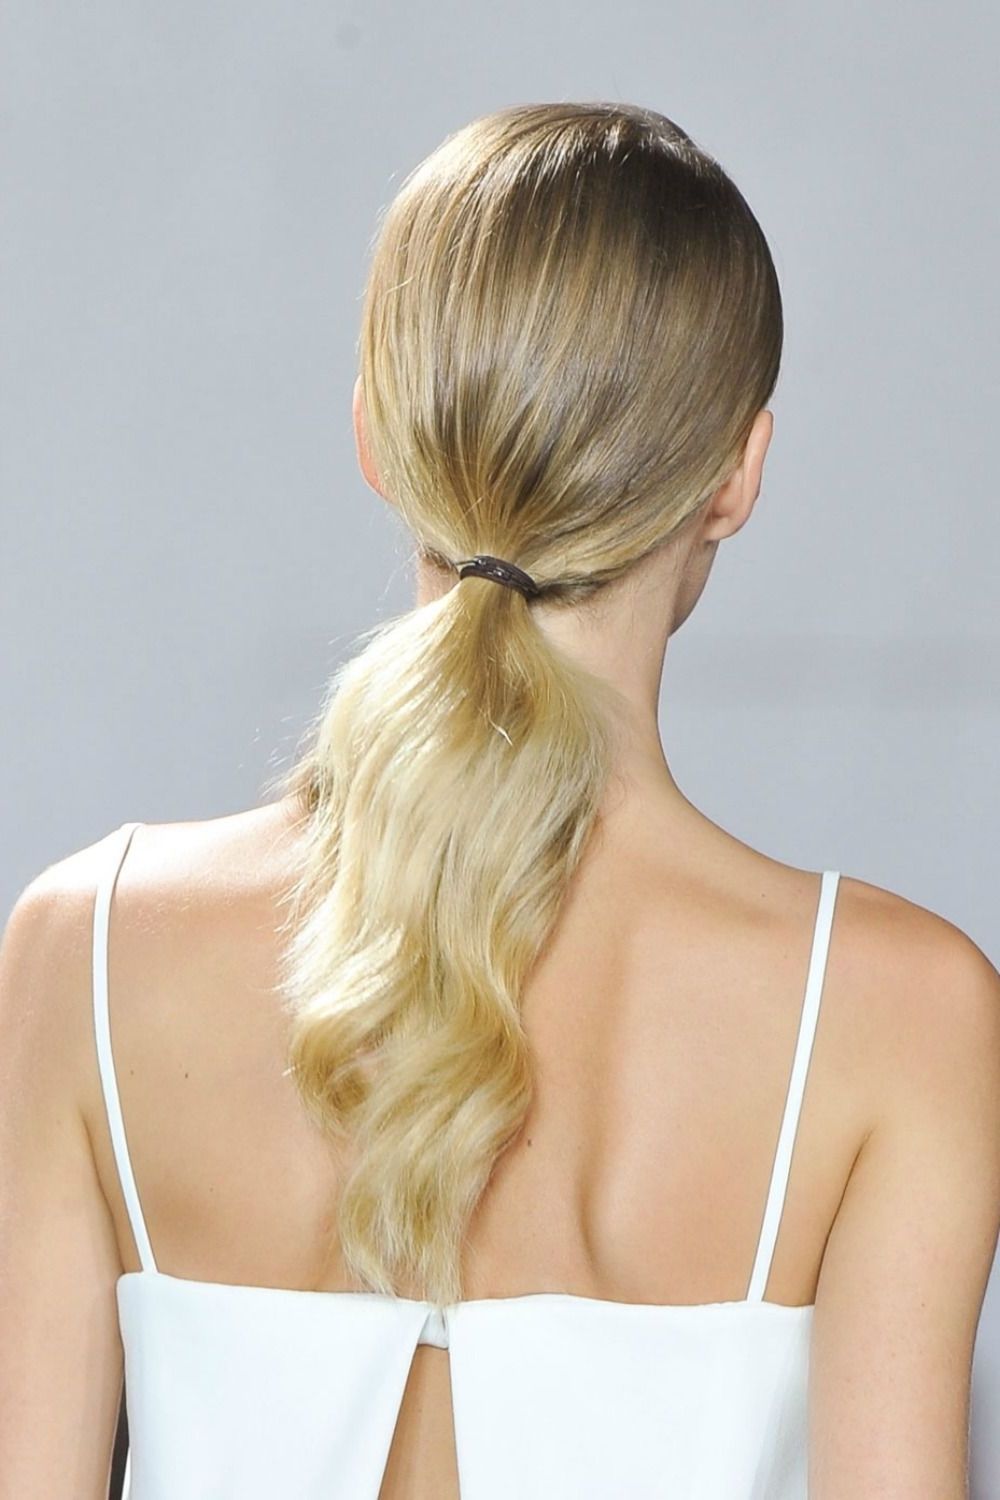 20 Ponytail Hairstyles – Easy Ponytail Ideas You Should This Summer Intended For Well Known Fancy Sleek And Polished Pony Hairstyles (View 20 of 20)